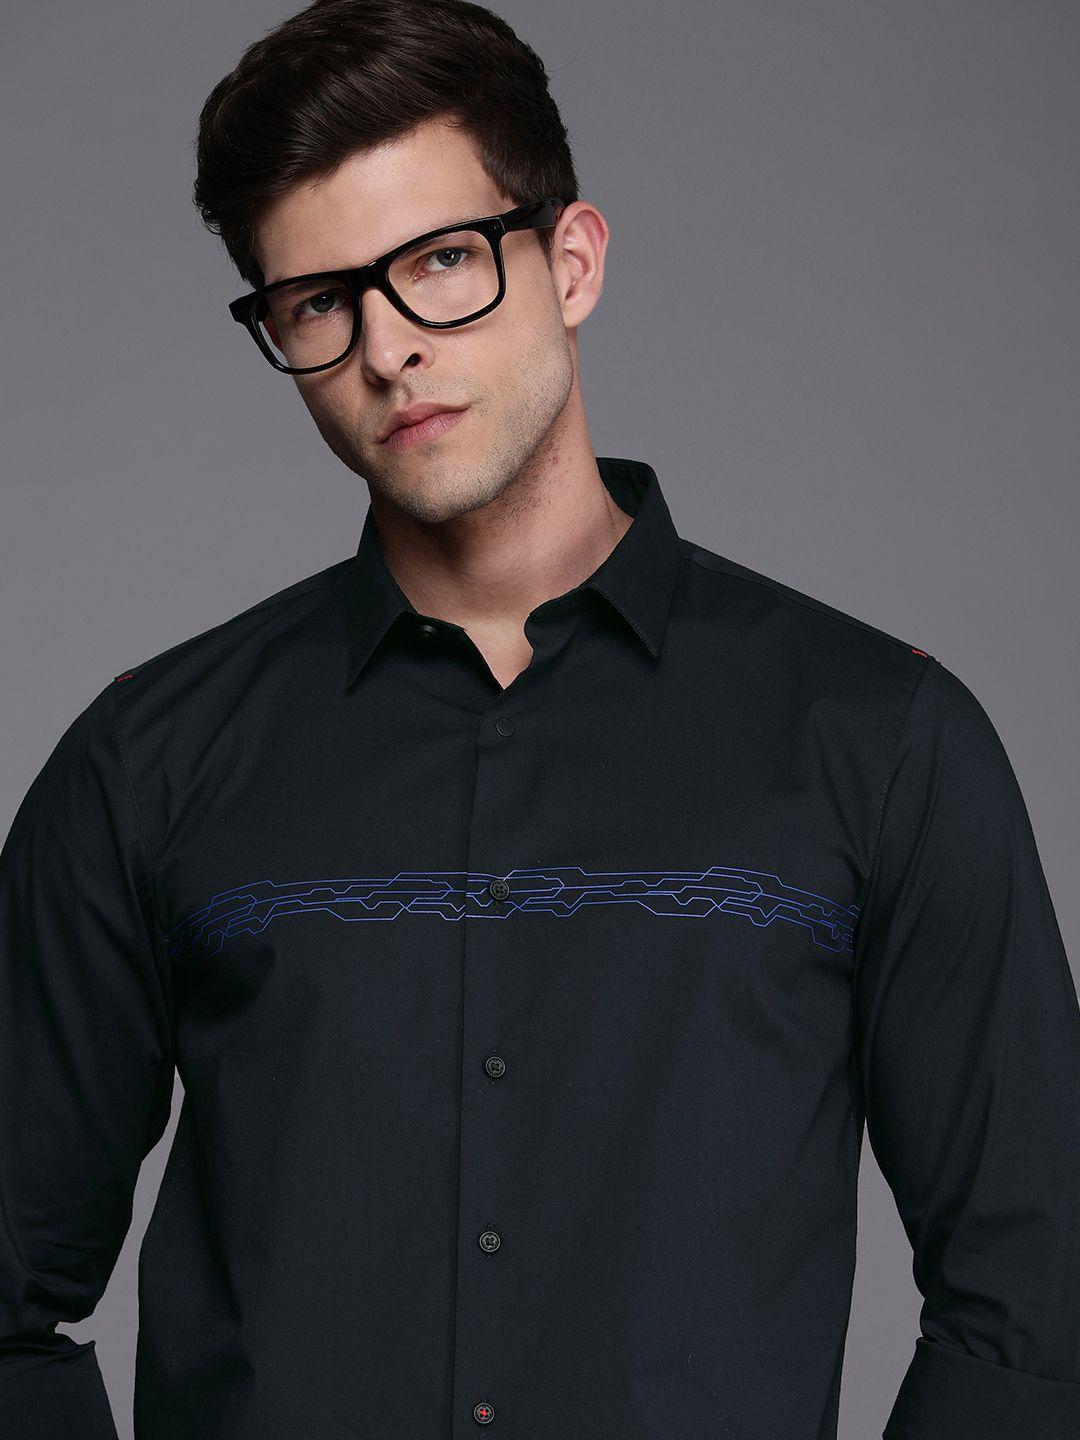 louis-philippe-ath-work-men-black-slim-fit-casual-shirt-with-graphic-striped-detail